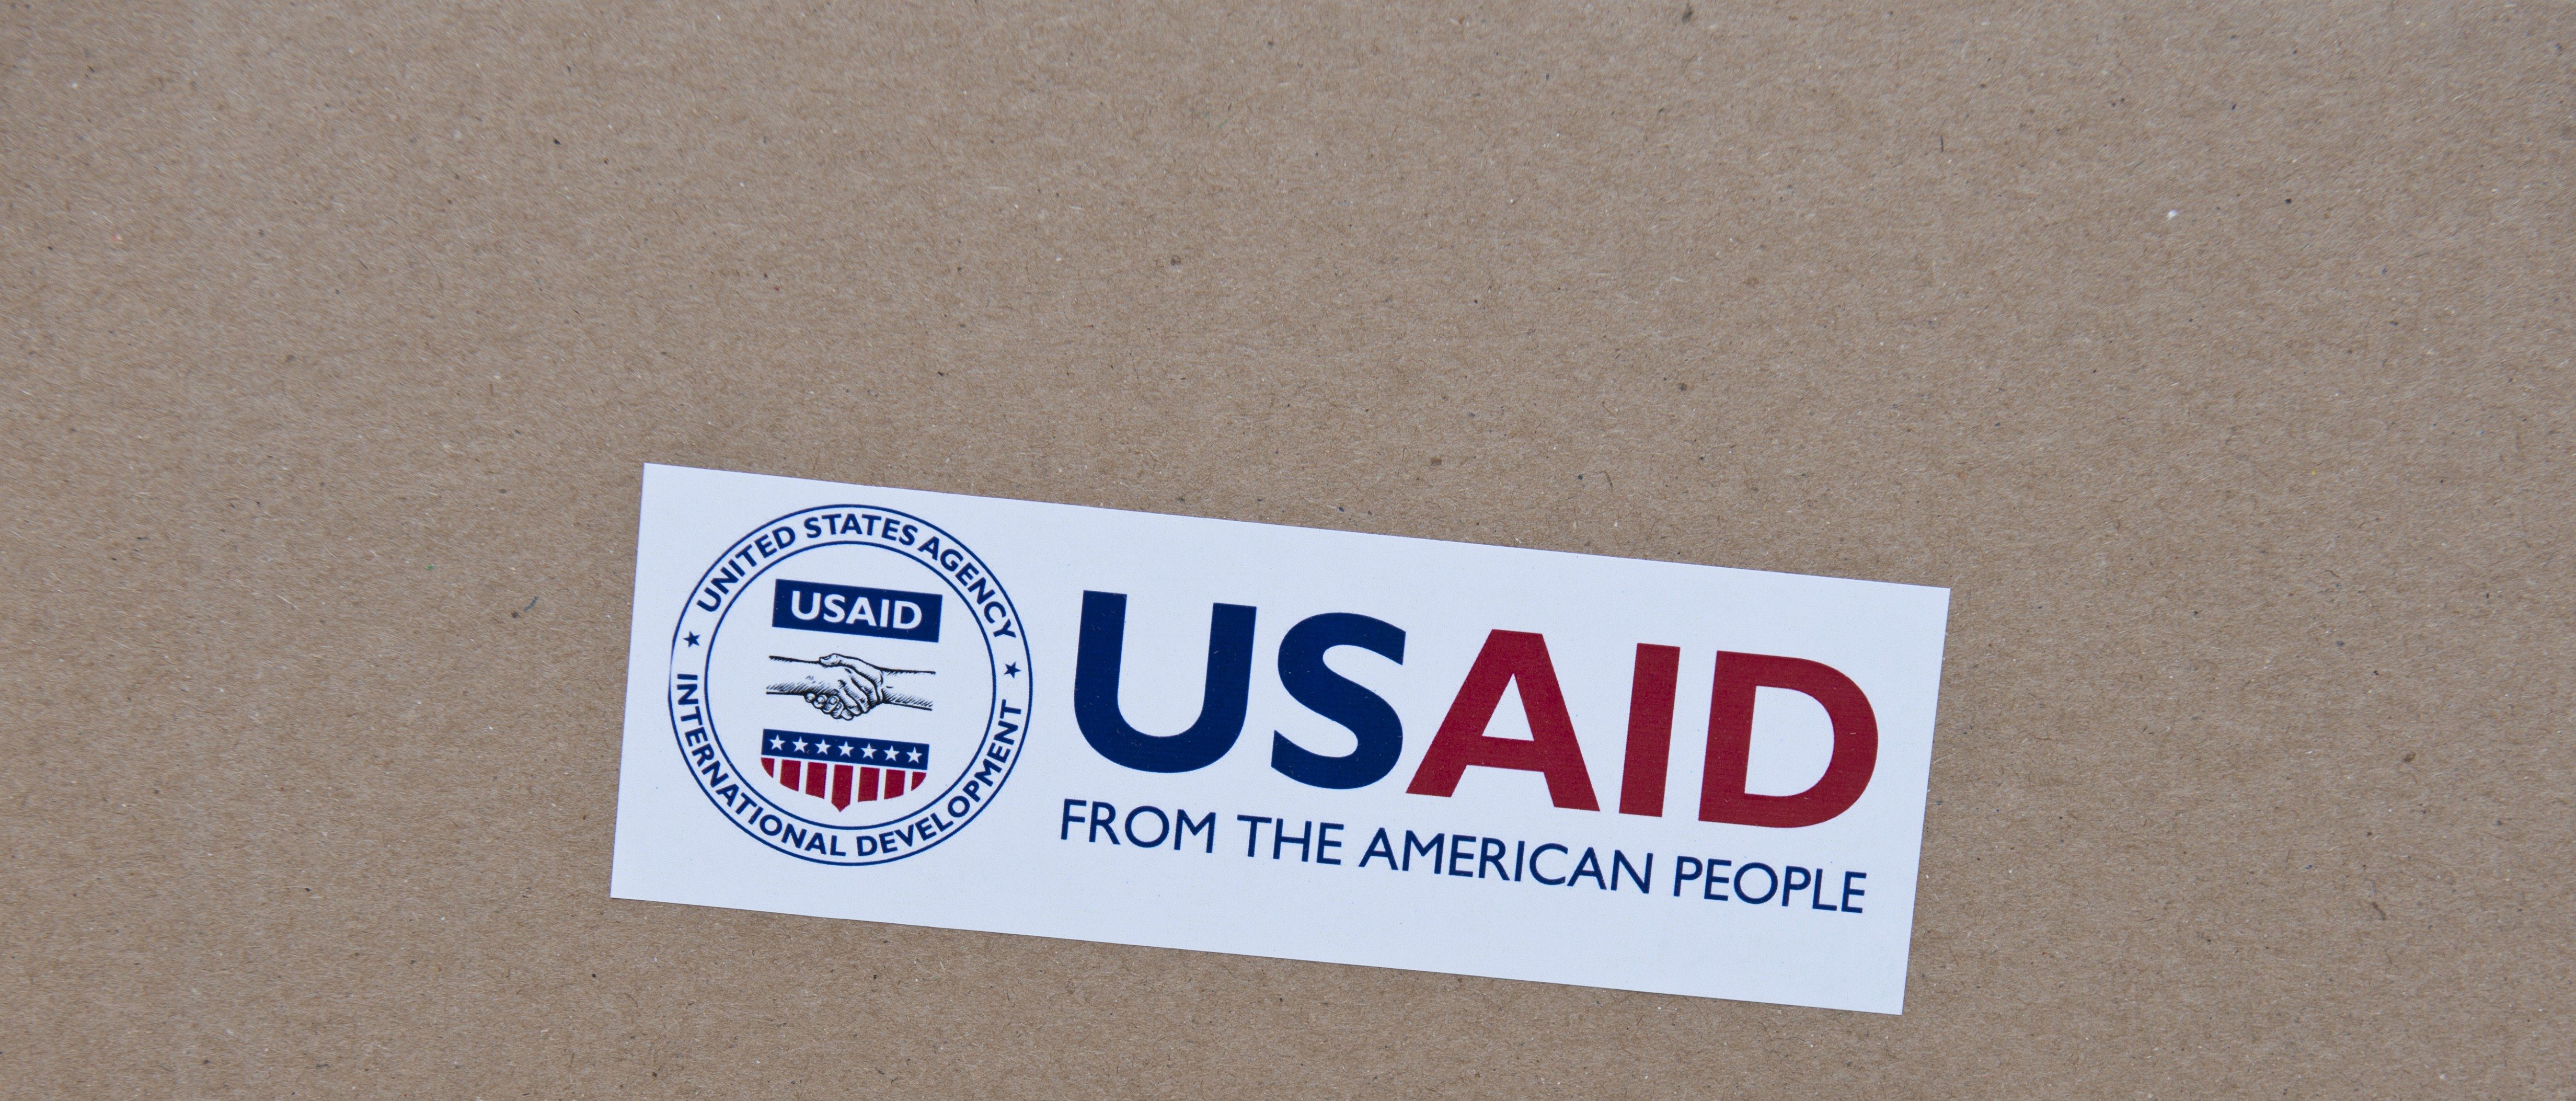 A picture taken on Aug. 15, 2014 shows a box containing sanitation kits and soap provided by the United States Agency for International Development (USAID) being stored at a UN school before a distribution to Palestinian displaced people in Gaza City. (ROBERTO SCHMIDT/AFP via Getty Images)